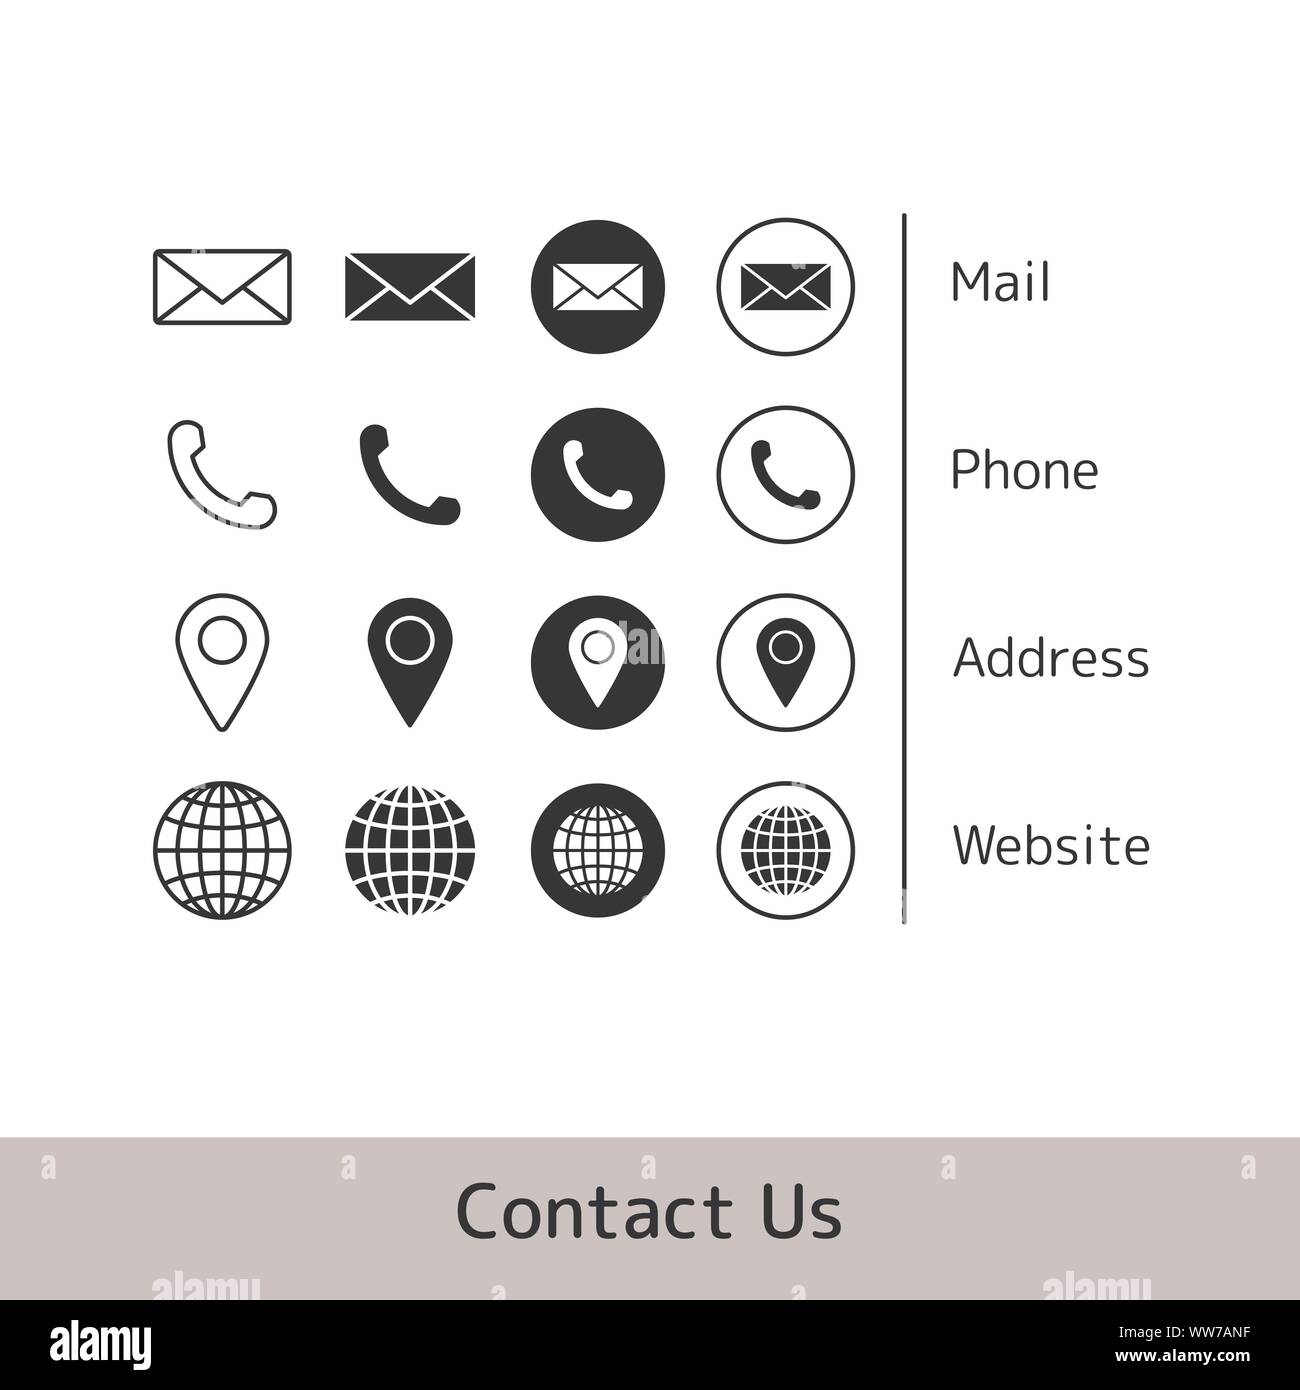 Business card contact icon  Business card icons, Contact icons vector,  Website icons